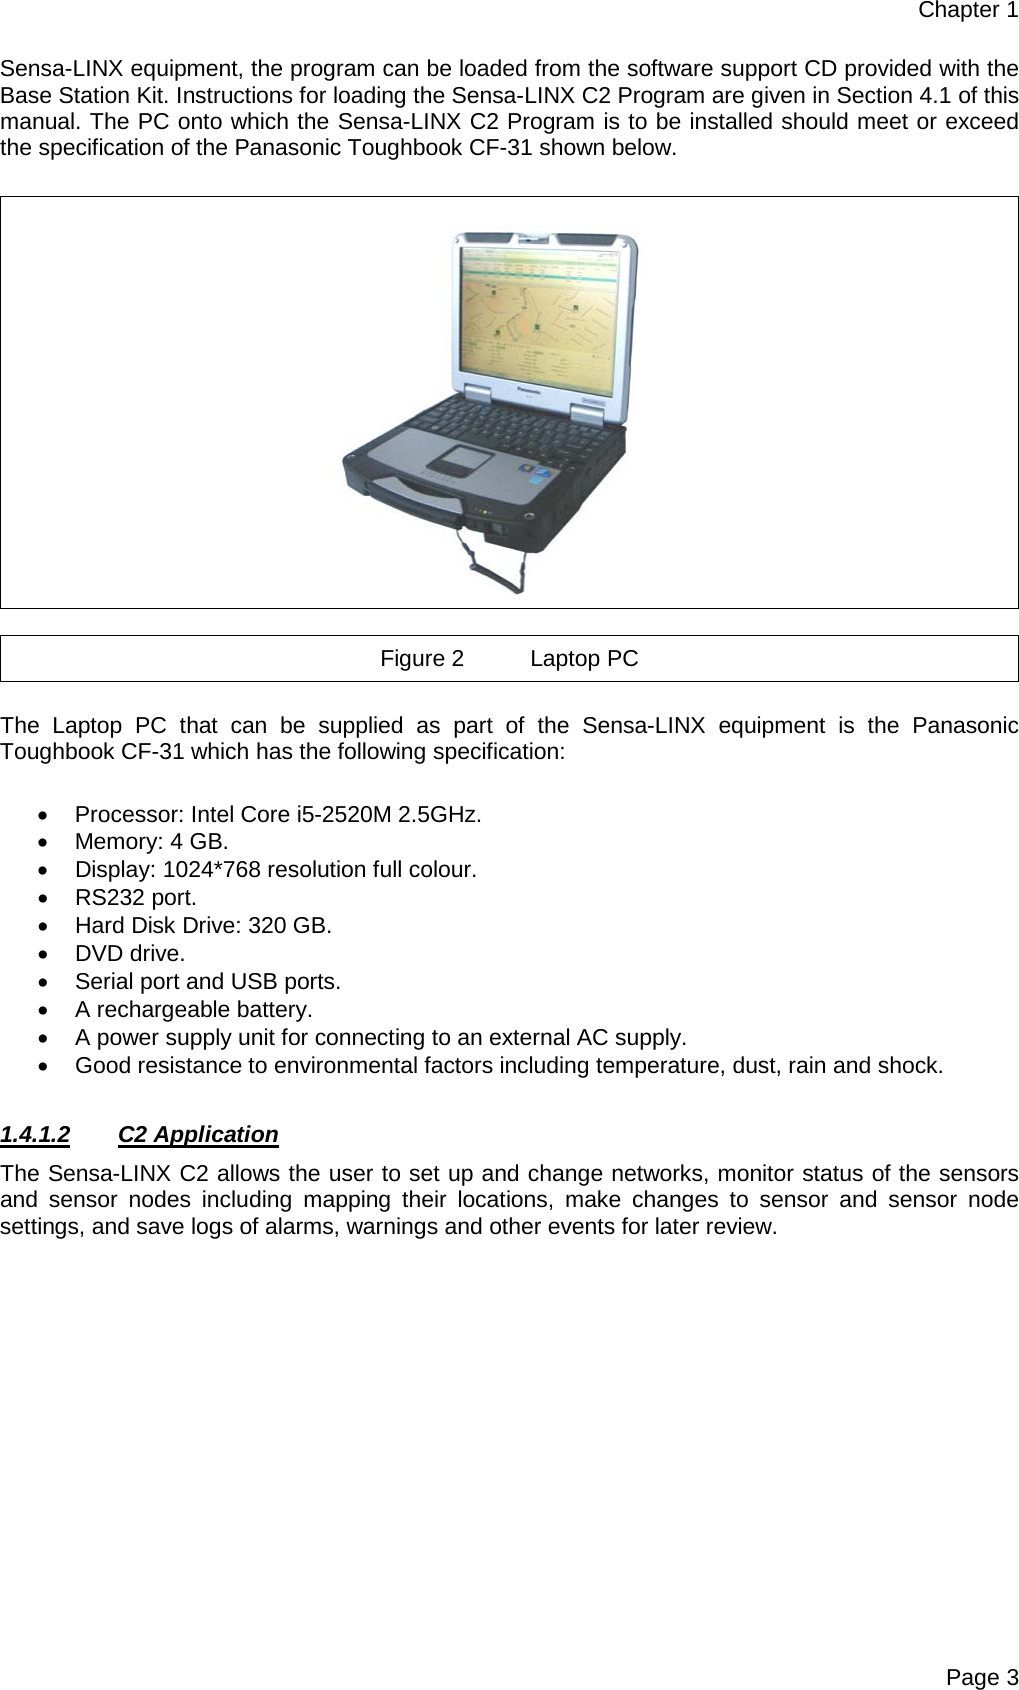 Chapter 1 Page 3 Sensa-LINX equipment, the program can be loaded from the software support CD provided with the Base Station Kit. Instructions for loading the Sensa-LINX C2 Program are given in Section 4.1 of this manual. The PC onto which the Sensa-LINX C2 Program is to be installed should meet or exceed the specification of the Panasonic Toughbook CF-31 shown below.    Figure 2 Laptop PC  The Laptop PC  that can be supplied as part of the Sensa-LINX  equipment is the Panasonic Toughbook CF-31 which has the following specification:  • Processor: Intel Core i5-2520M 2.5GHz. • Memory: 4 GB. • Display: 1024*768 resolution full colour. • RS232 port. • Hard Disk Drive: 320 GB. • DVD drive. • Serial port and USB ports. • A rechargeable battery. • A power supply unit for connecting to an external AC supply. • Good resistance to environmental factors including temperature, dust, rain and shock.  1.4.1.2 C2 Application The Sensa-LINX C2 allows the user to set up and change networks, monitor status of the sensors and  sensor nodes including mapping their locations, make changes to sensor and  sensor node settings, and save logs of alarms, warnings and other events for later review.    